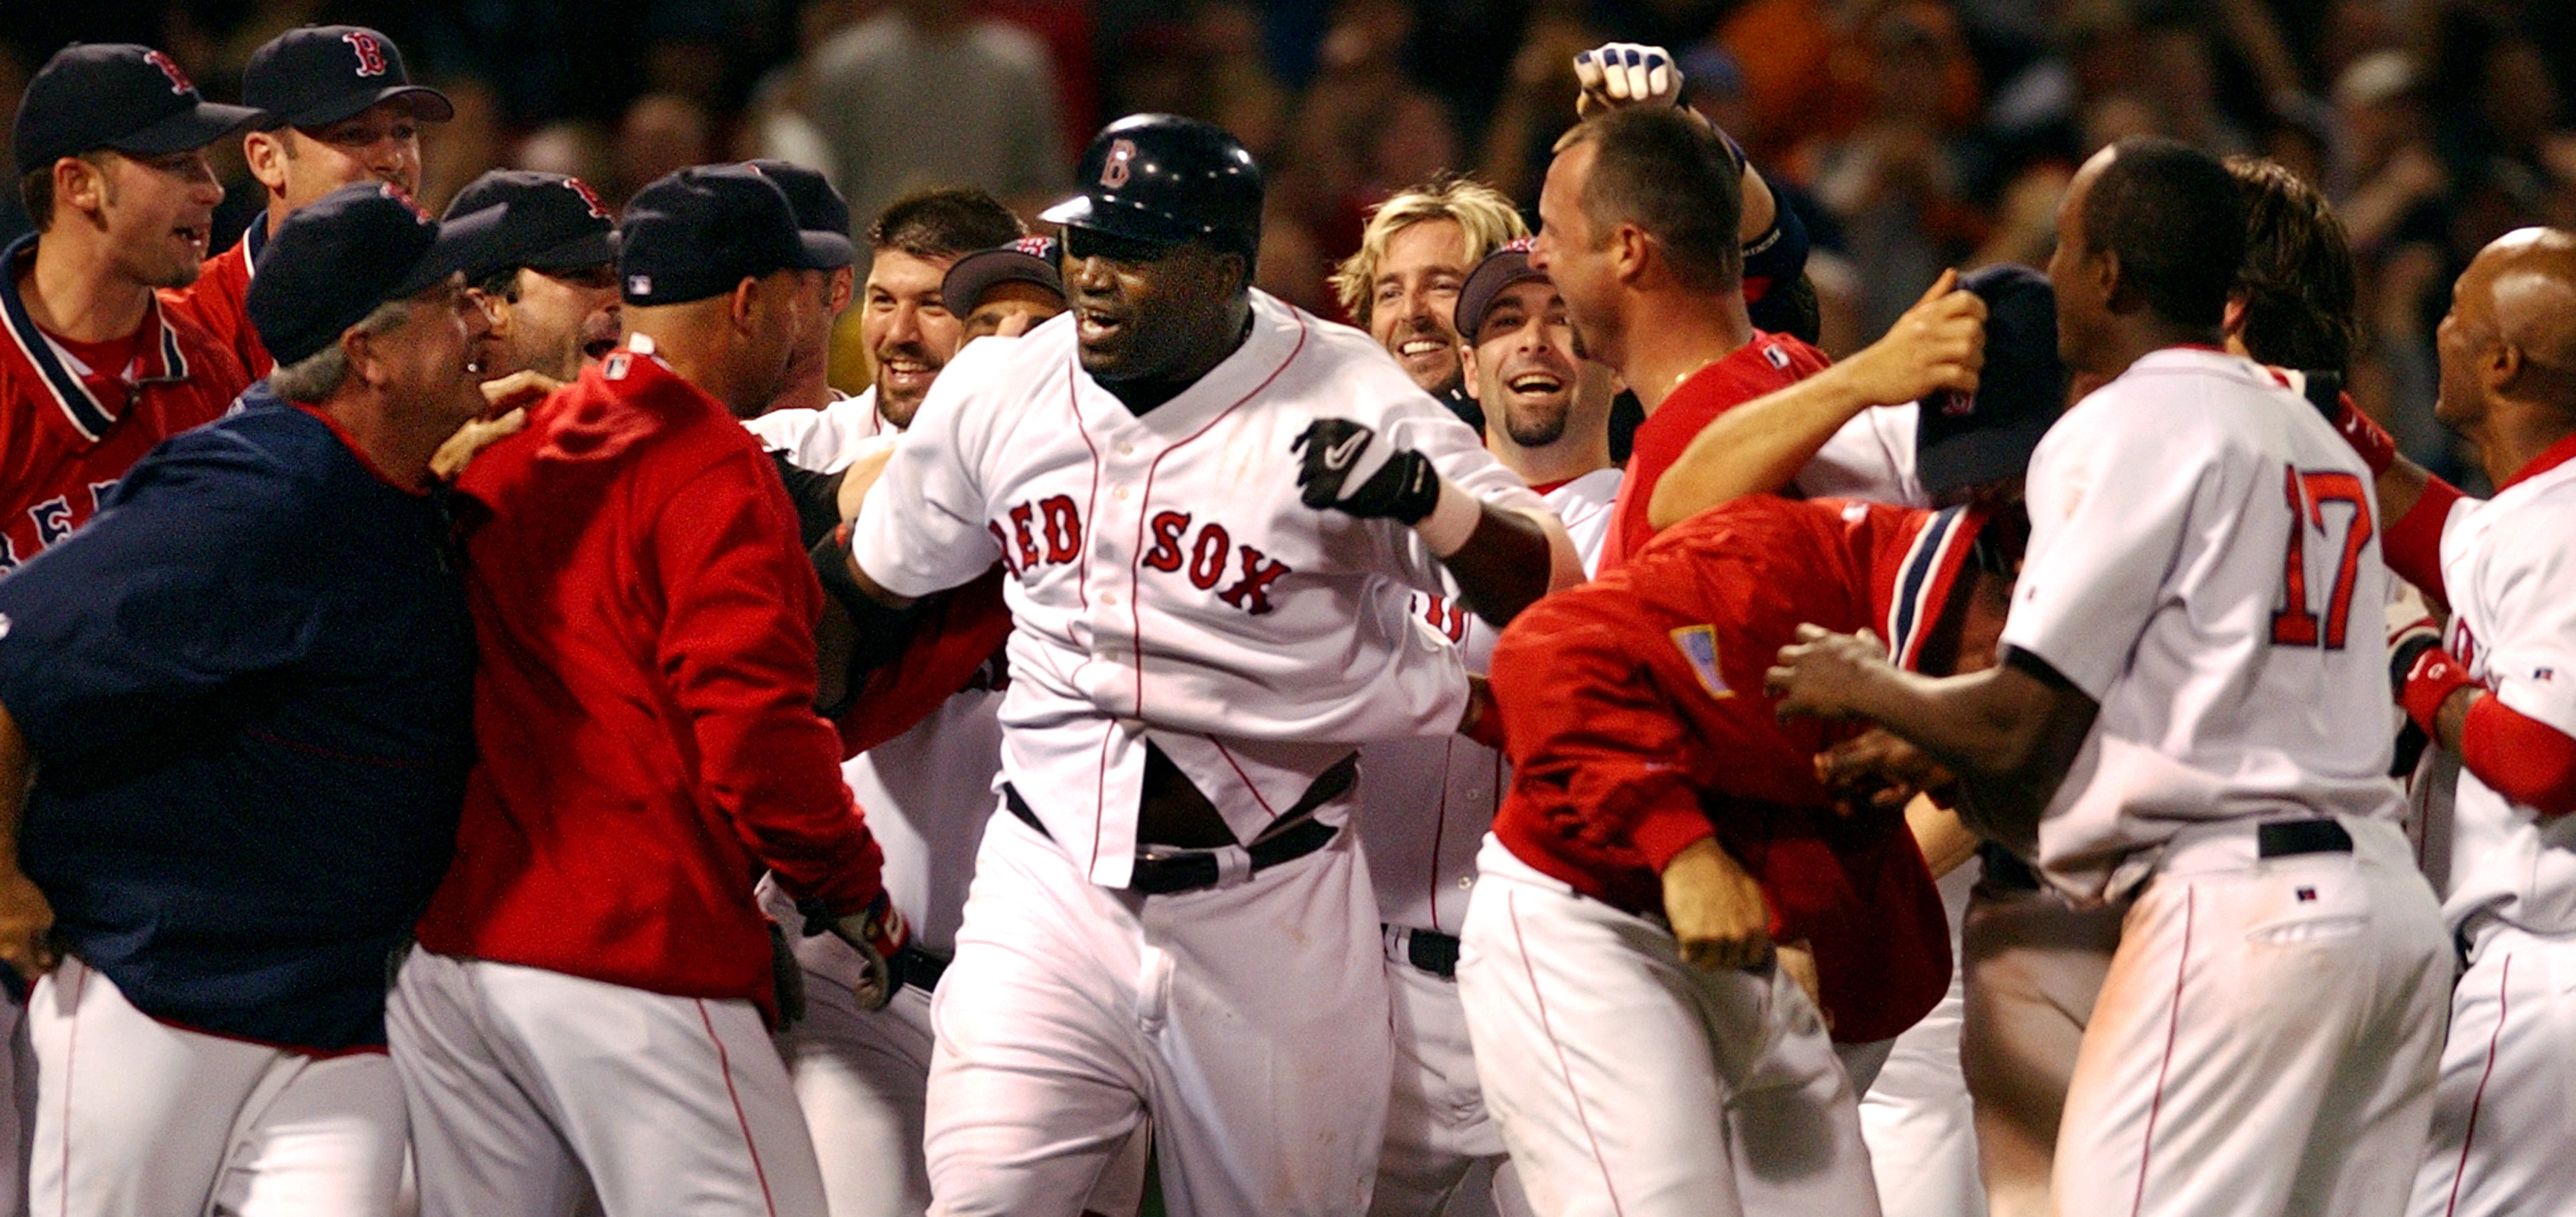 Ortiz's Red Sox teammates mob the slugger after he hit a solo home run in the 10th inning of a game against the Orioles on Sept. 23, 2003, to earn a comeback win.